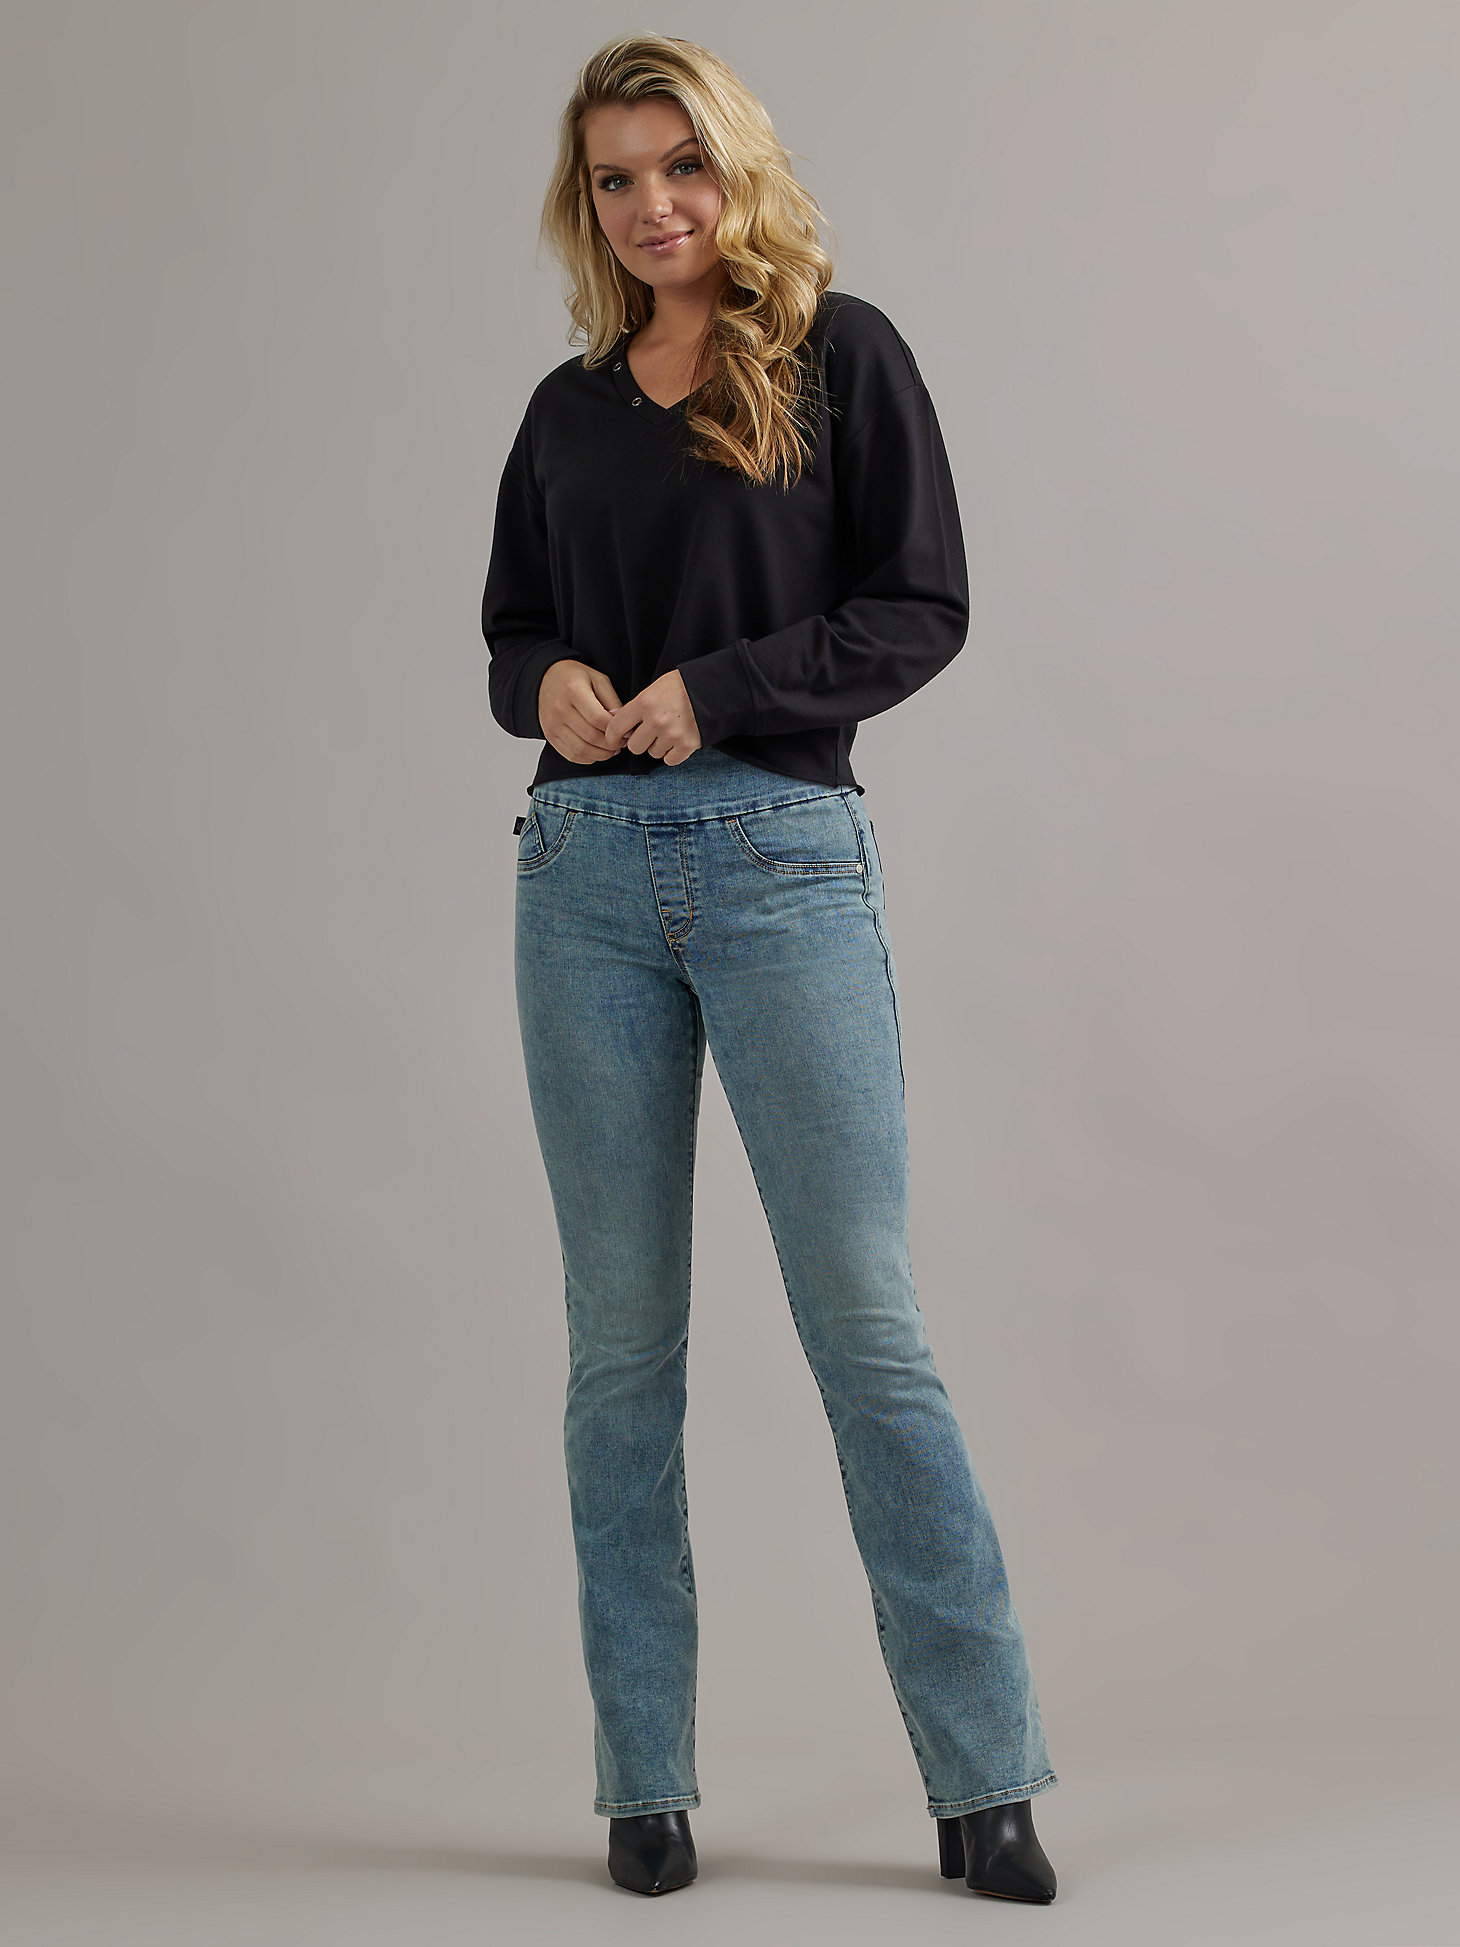 Women's Fever Bootcut Jean in Comatose main view